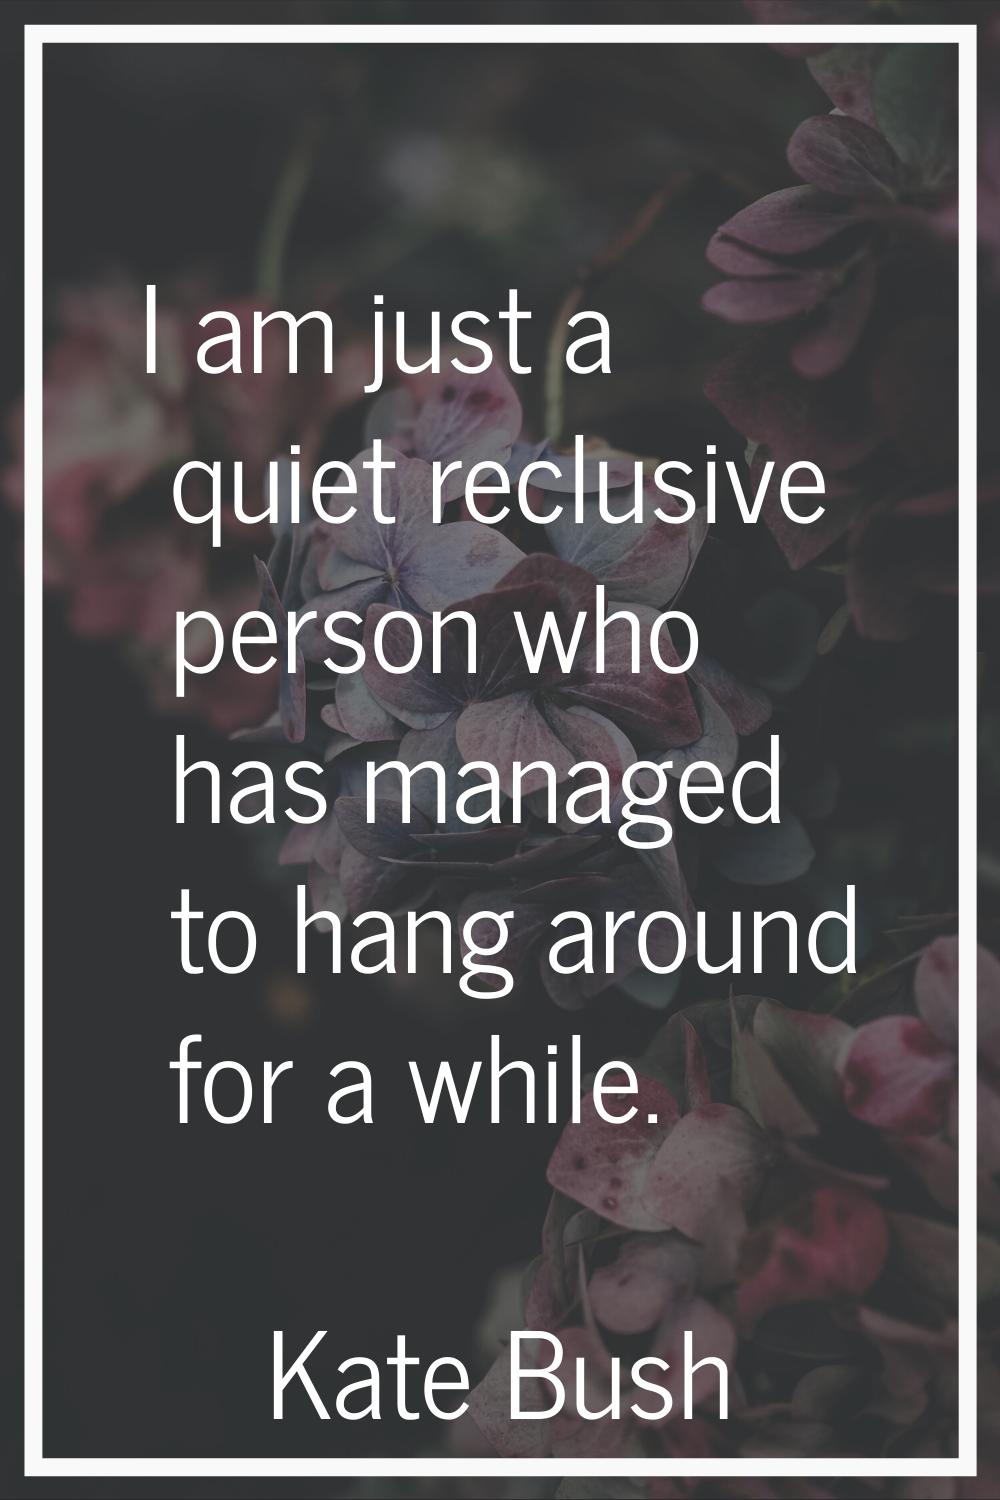 I am just a quiet reclusive person who has managed to hang around for a while.